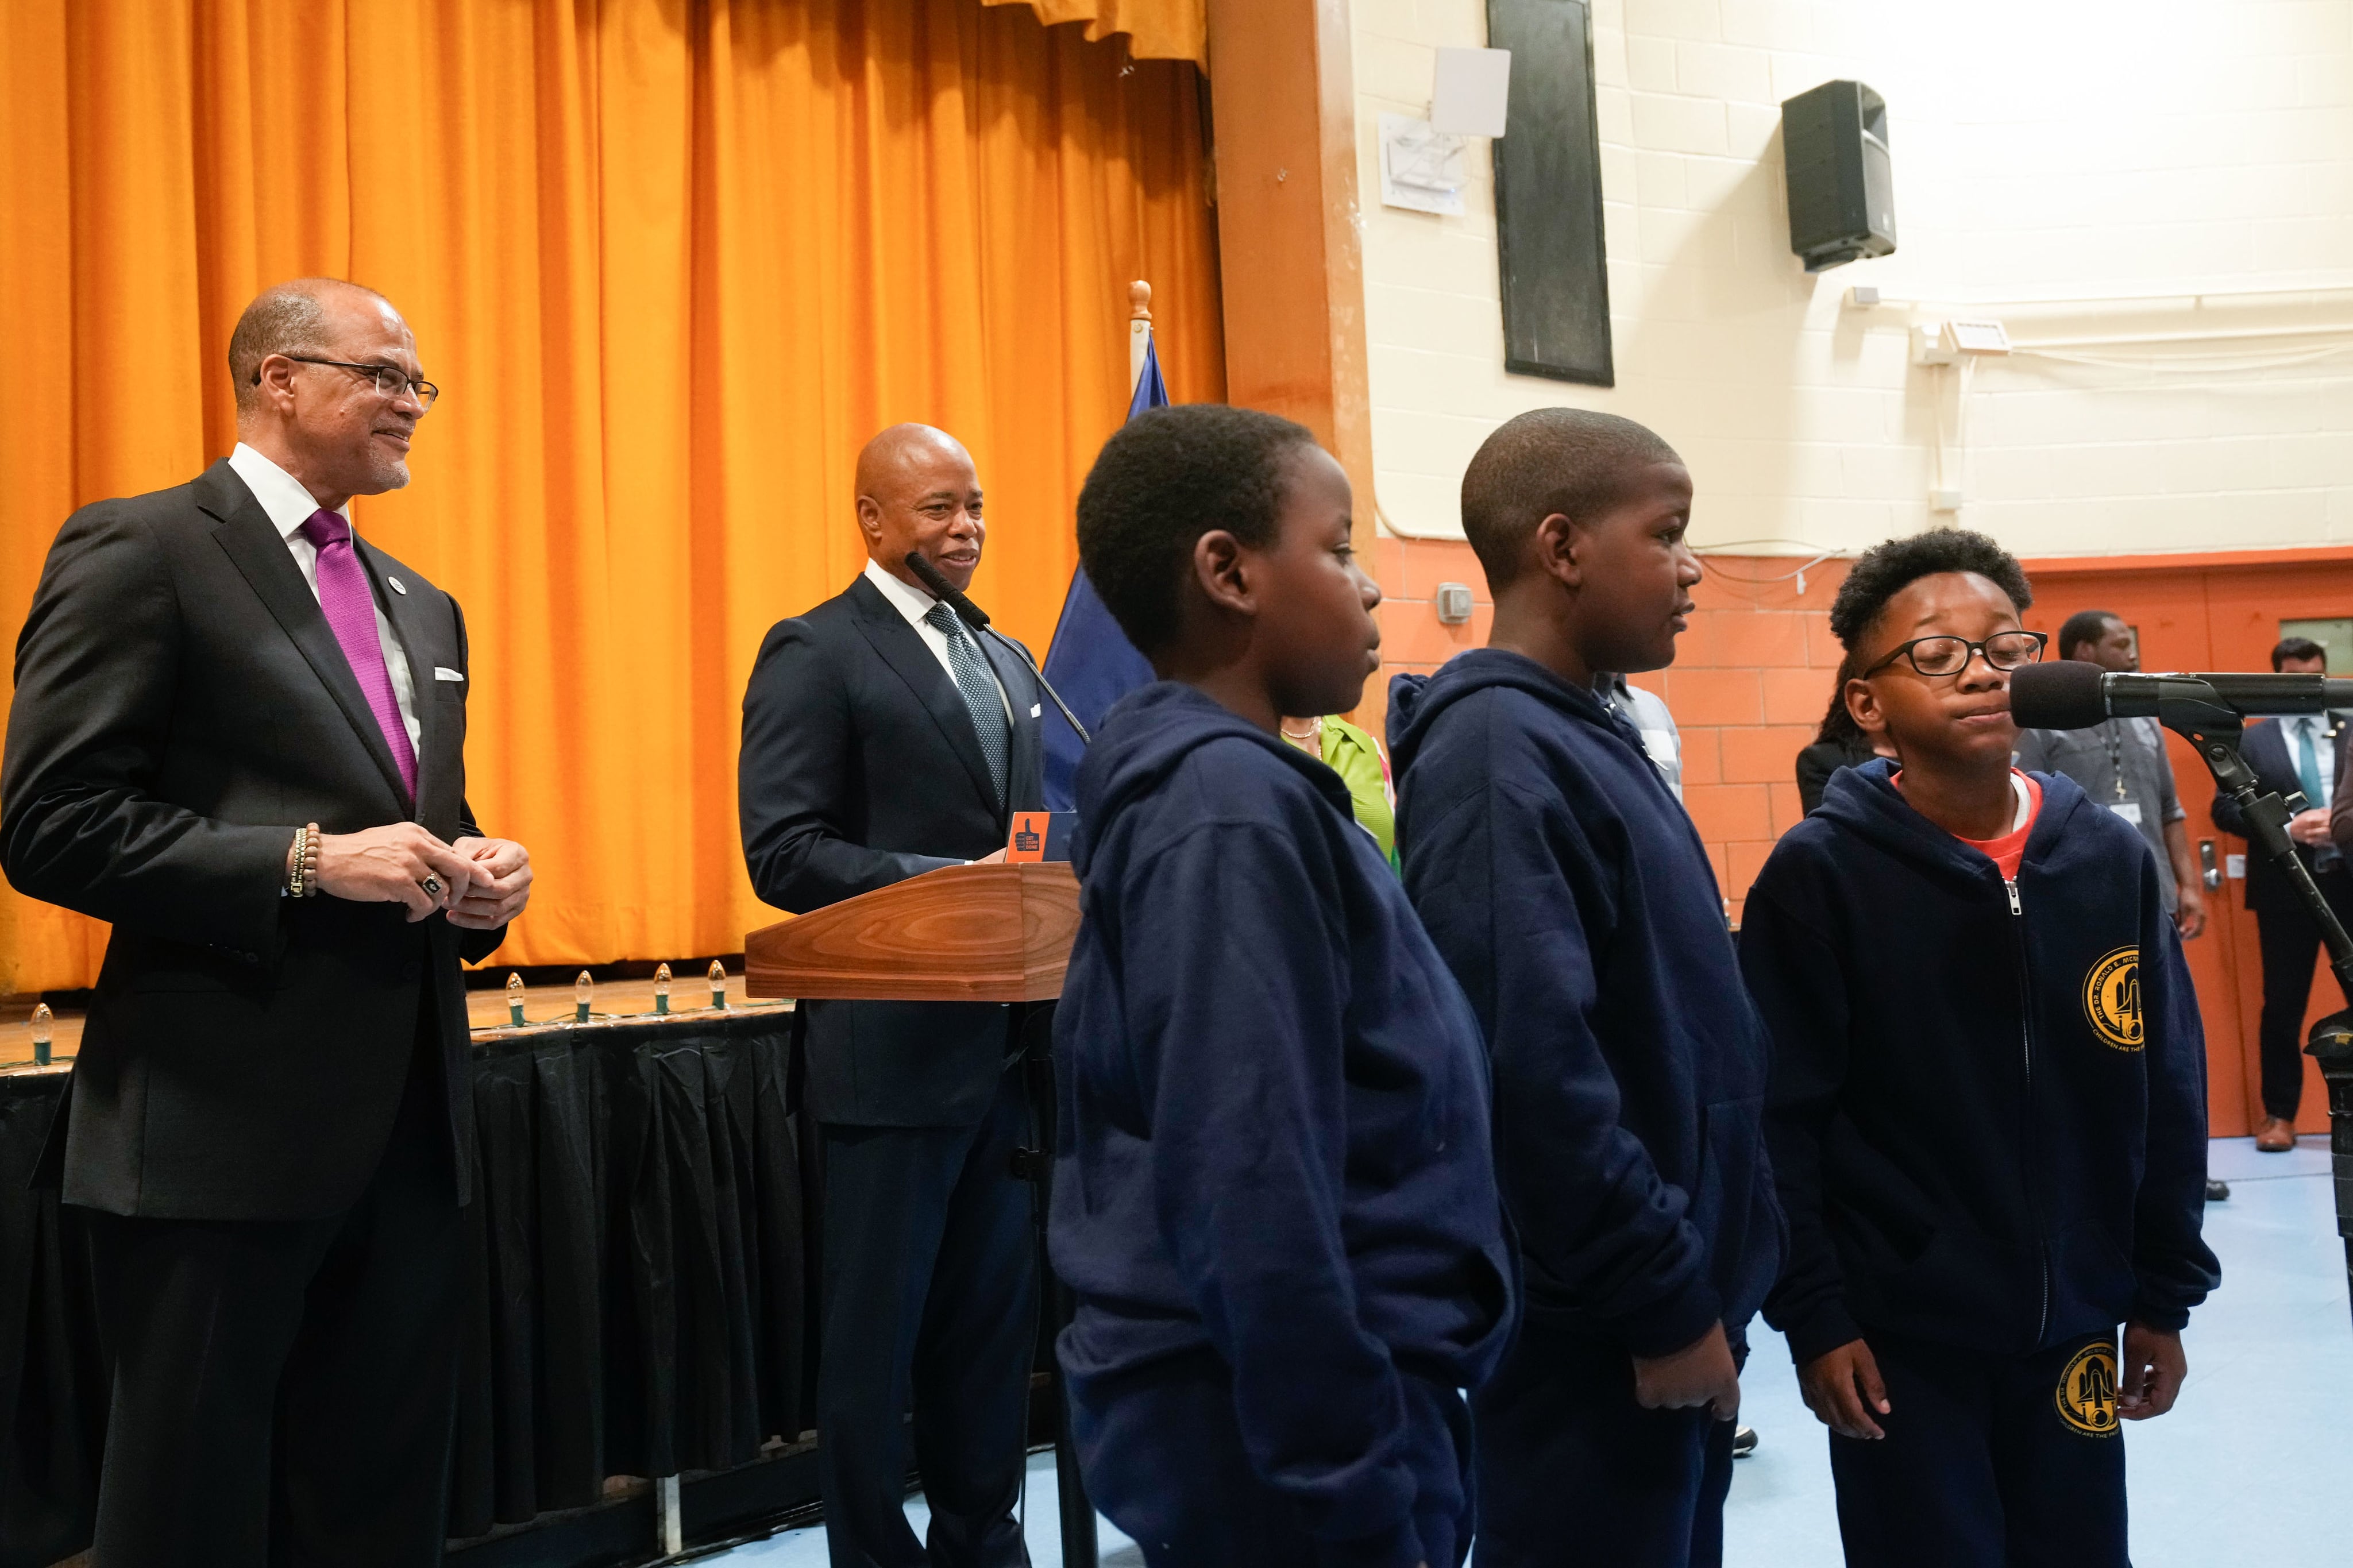 New York schools Chancellor David Banks and New York Mayor Eric Adams stand behind three students who are practicing deep breathing in a room.